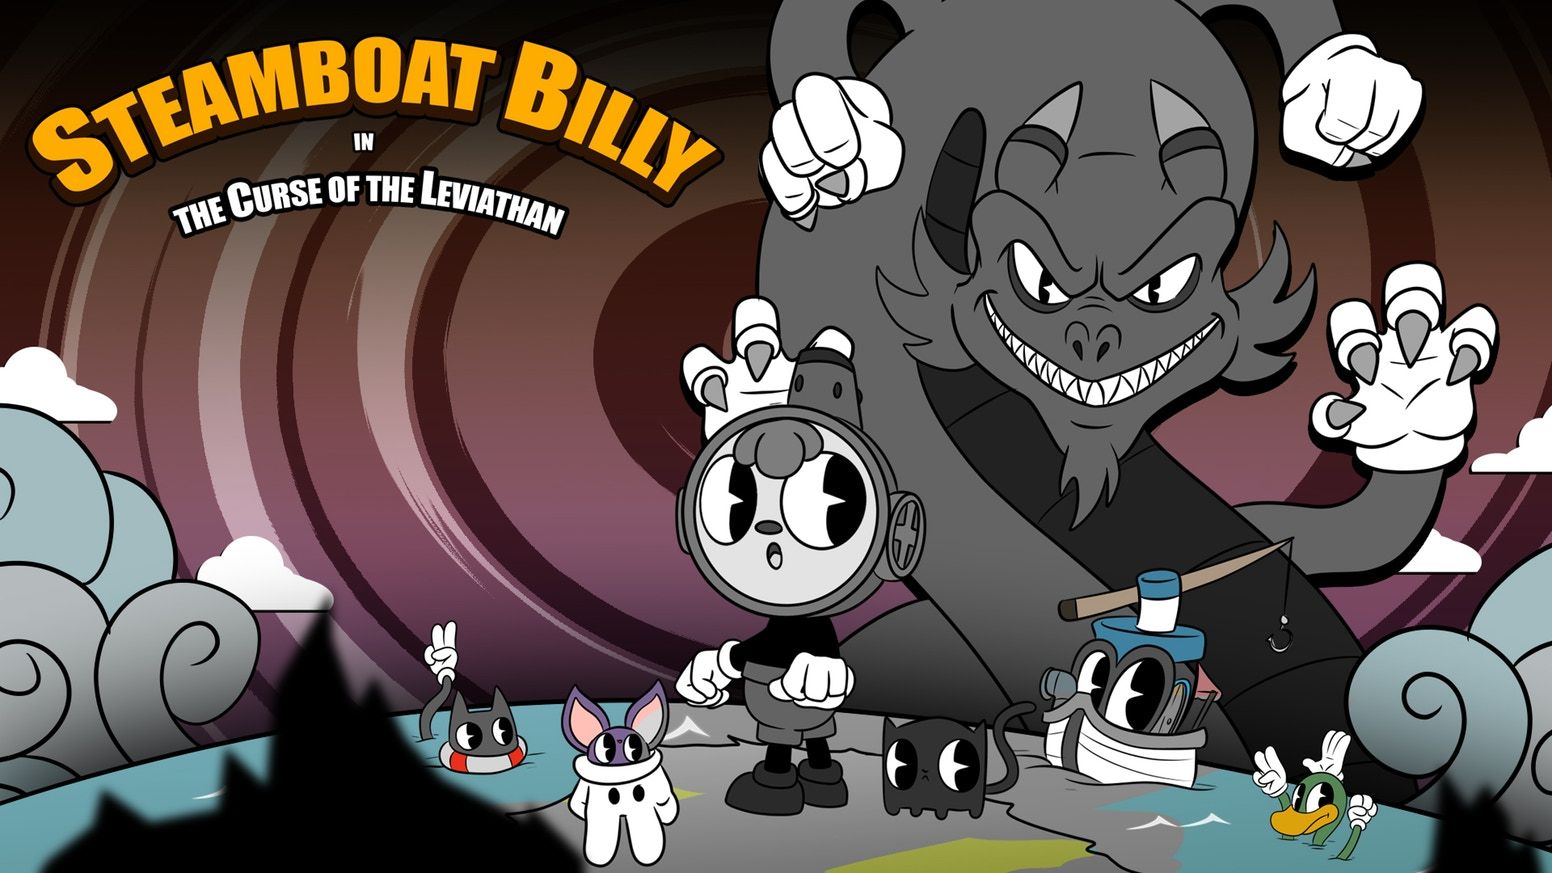 Steamboat Billy: The Curse of the Leviathan